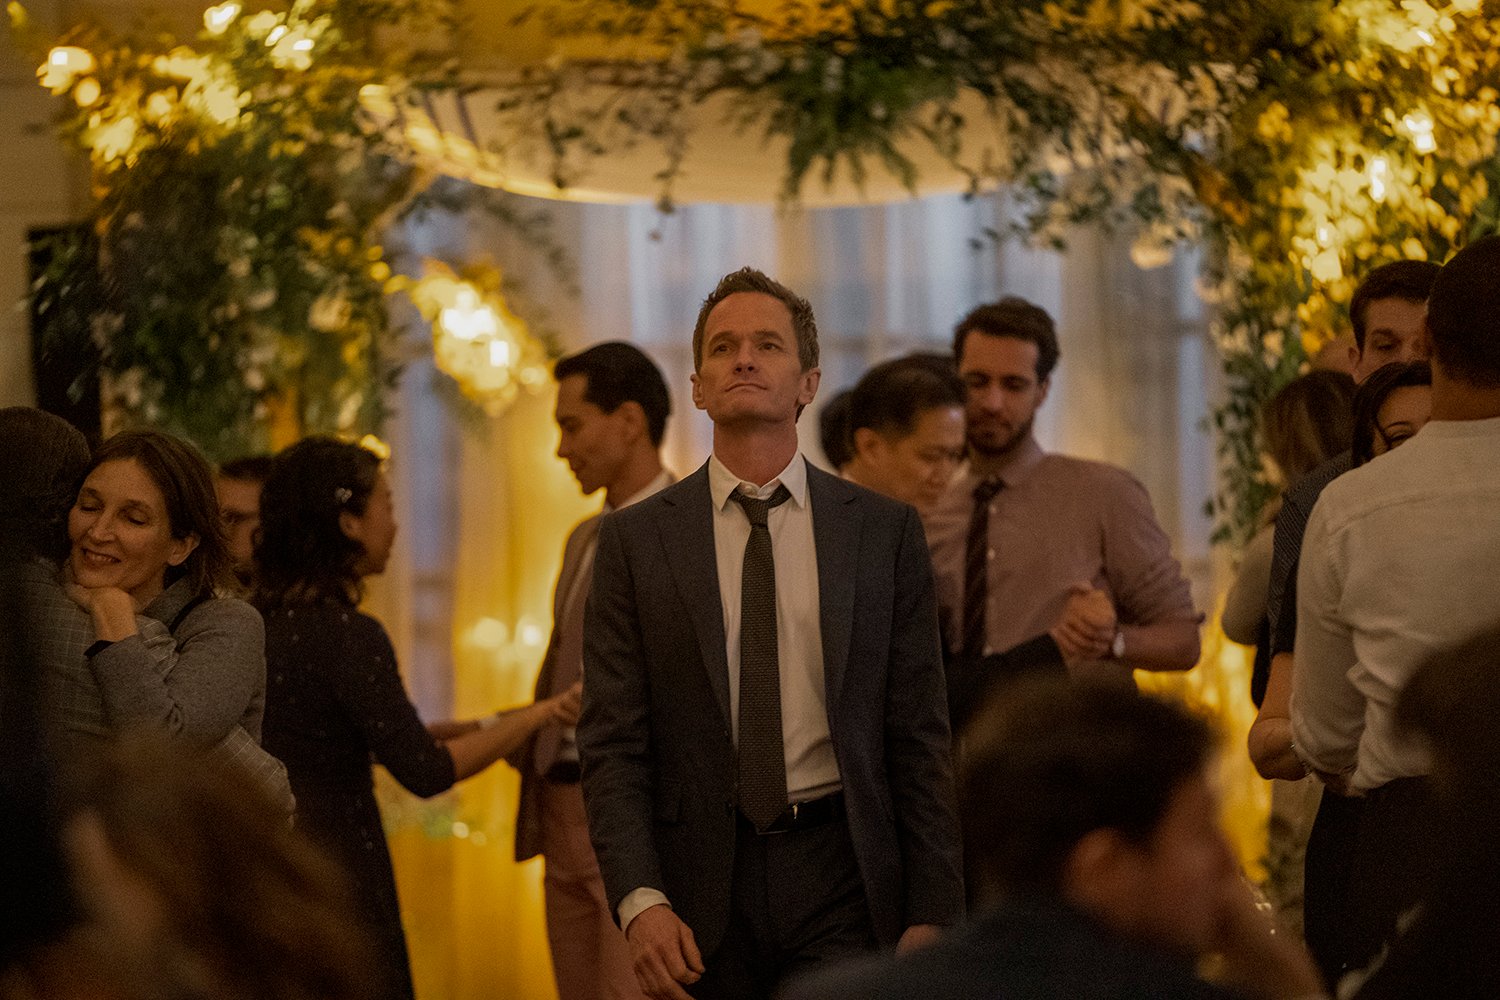 Neil Patrick Harris as Michael standing in a crowd in Uncoupled on Netflix.